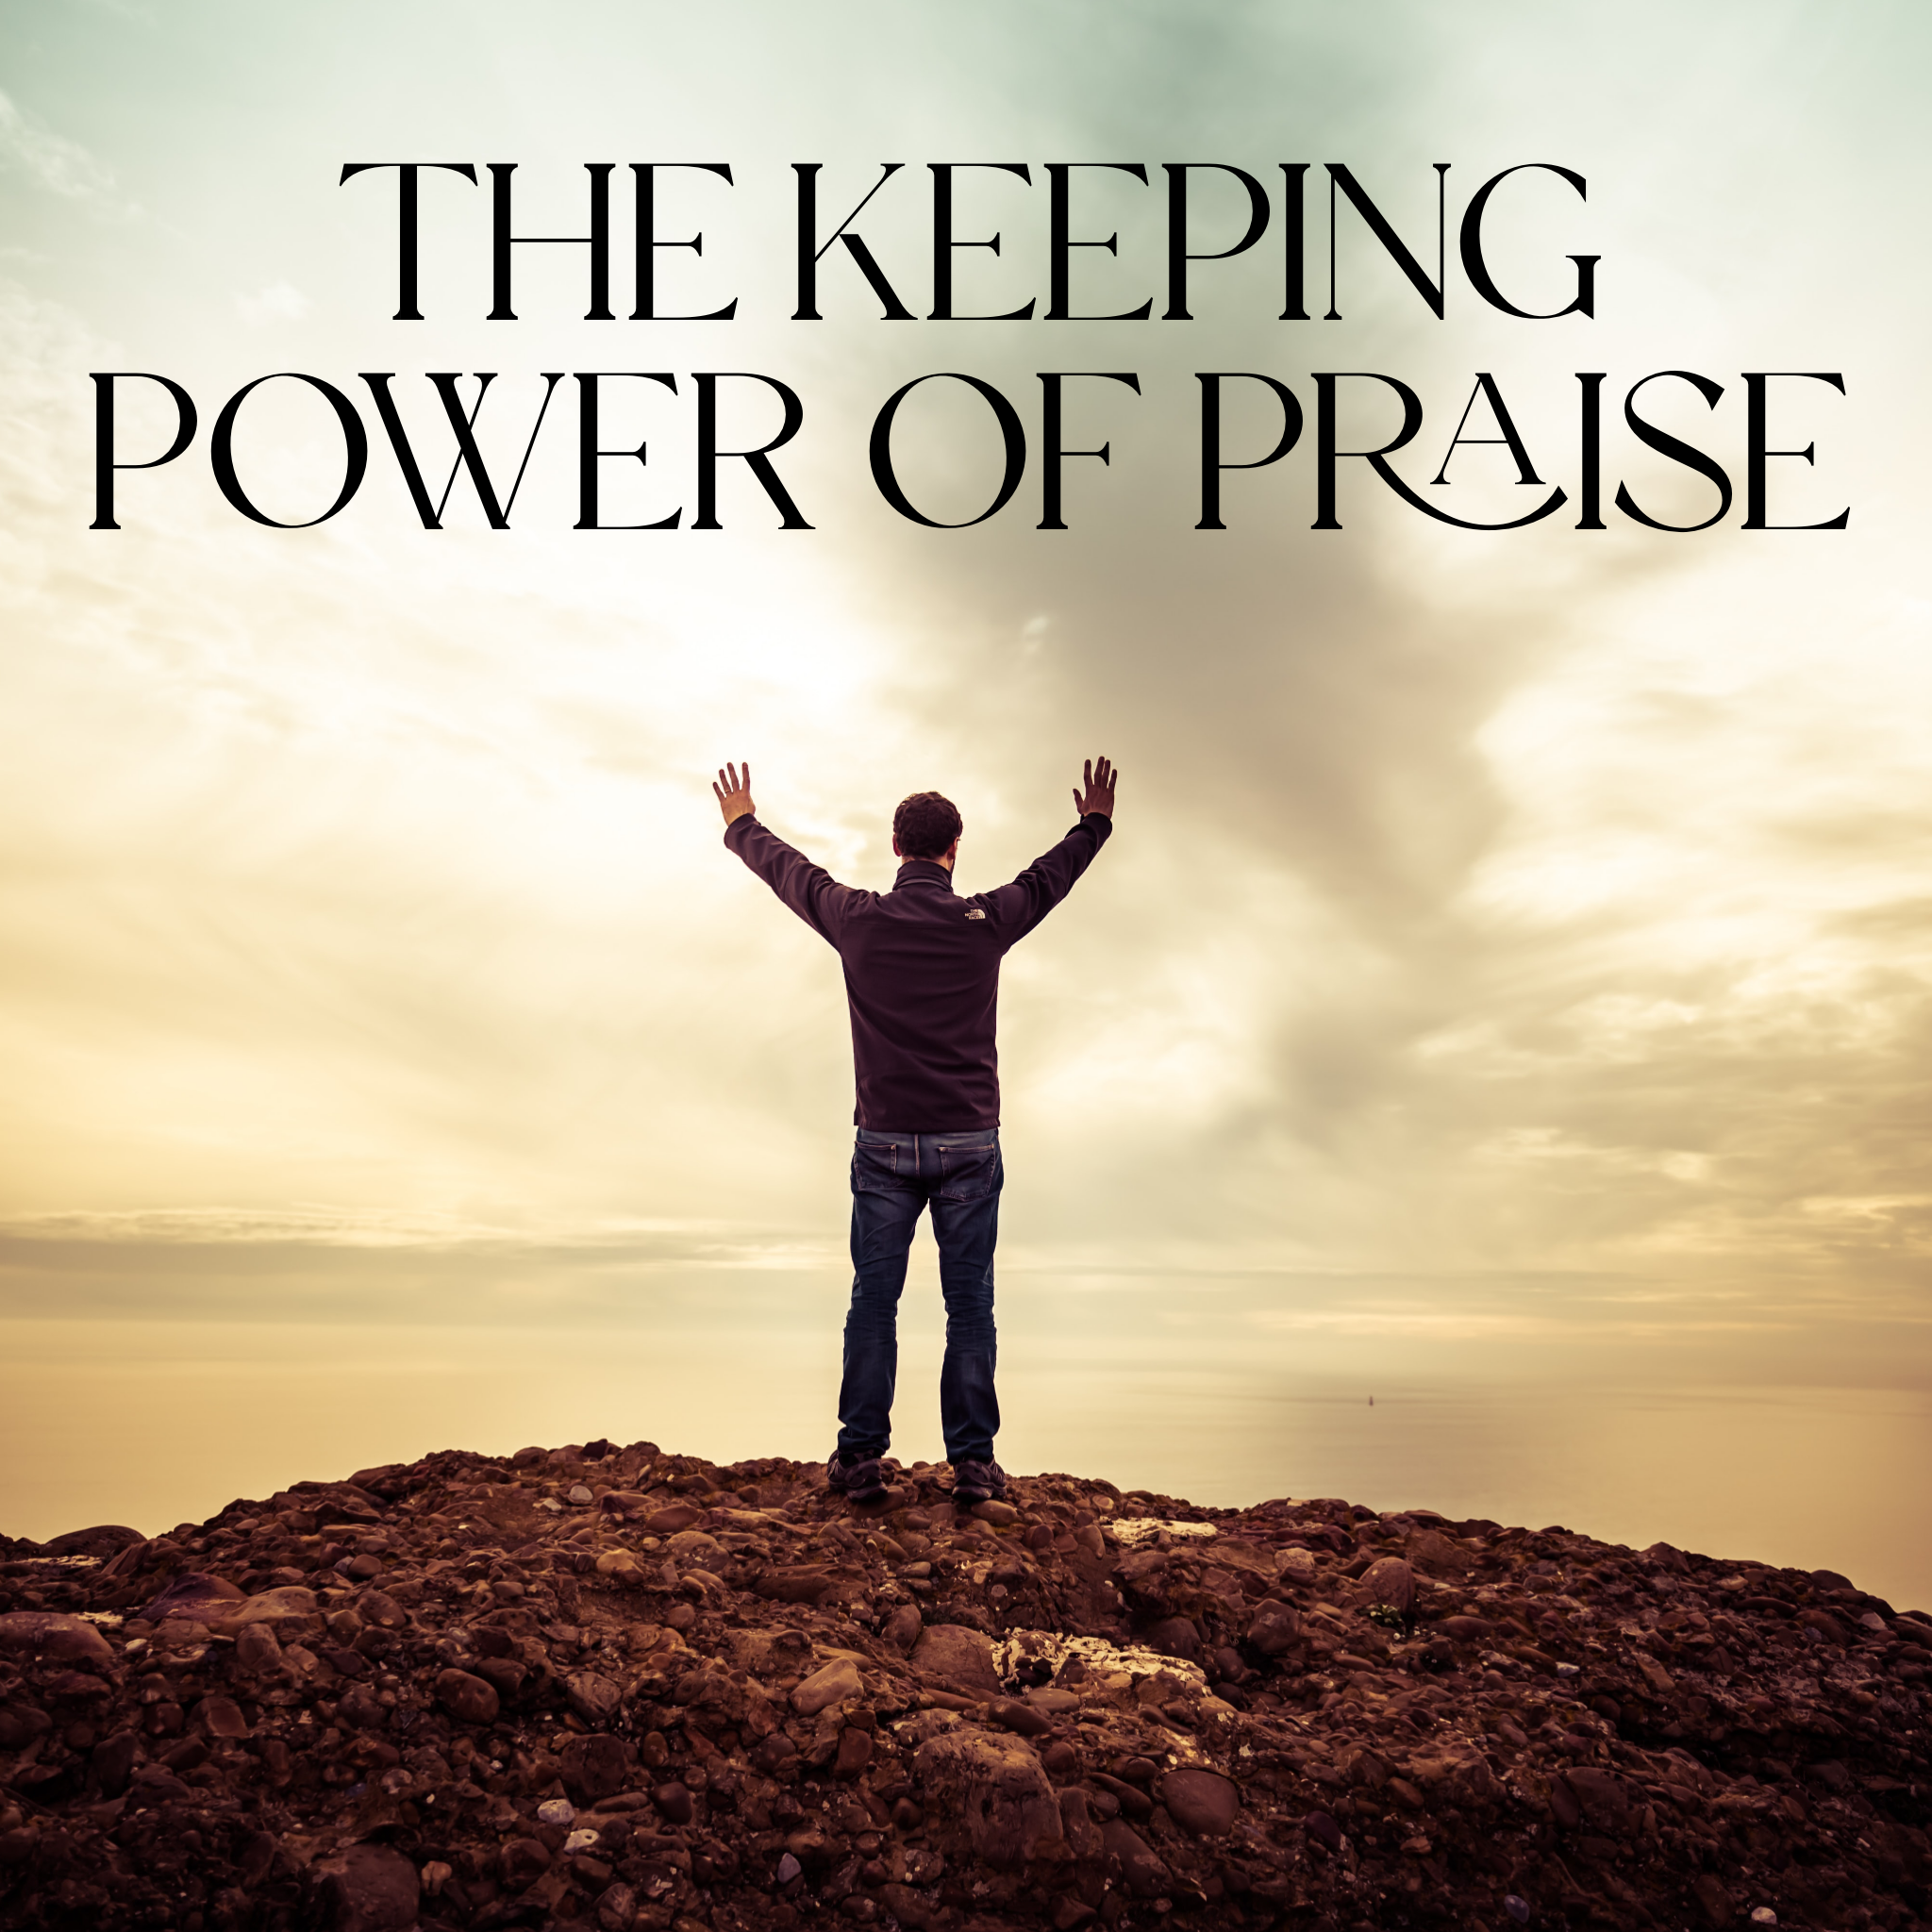 The Keeping Power of Praise - 6/26/22